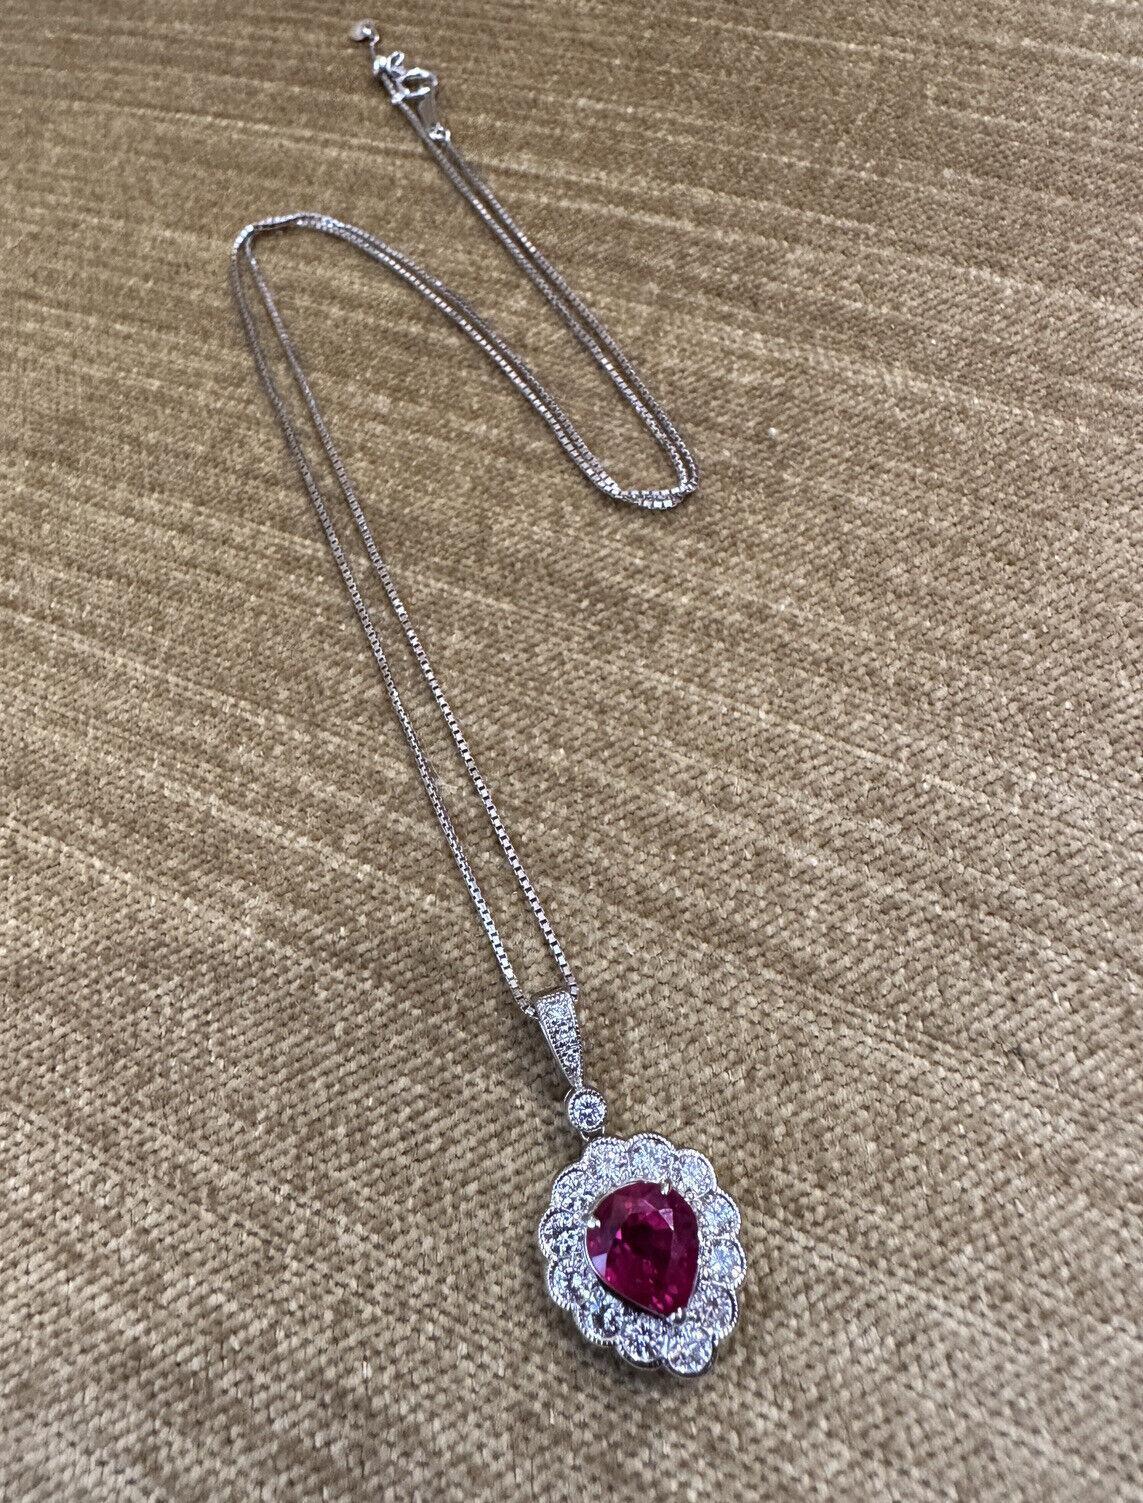 GIA Burma Ruby Pear-Shaped Pendant with Diamonds in Platinum

Ruby and Diamond Pendant Necklace features a 2.02 carat Pear-shaped Red Ruby surrounded by 12 Natural Round Brilliant Diamonds, with Round Diamonds in the bale, all set in Platinum on a